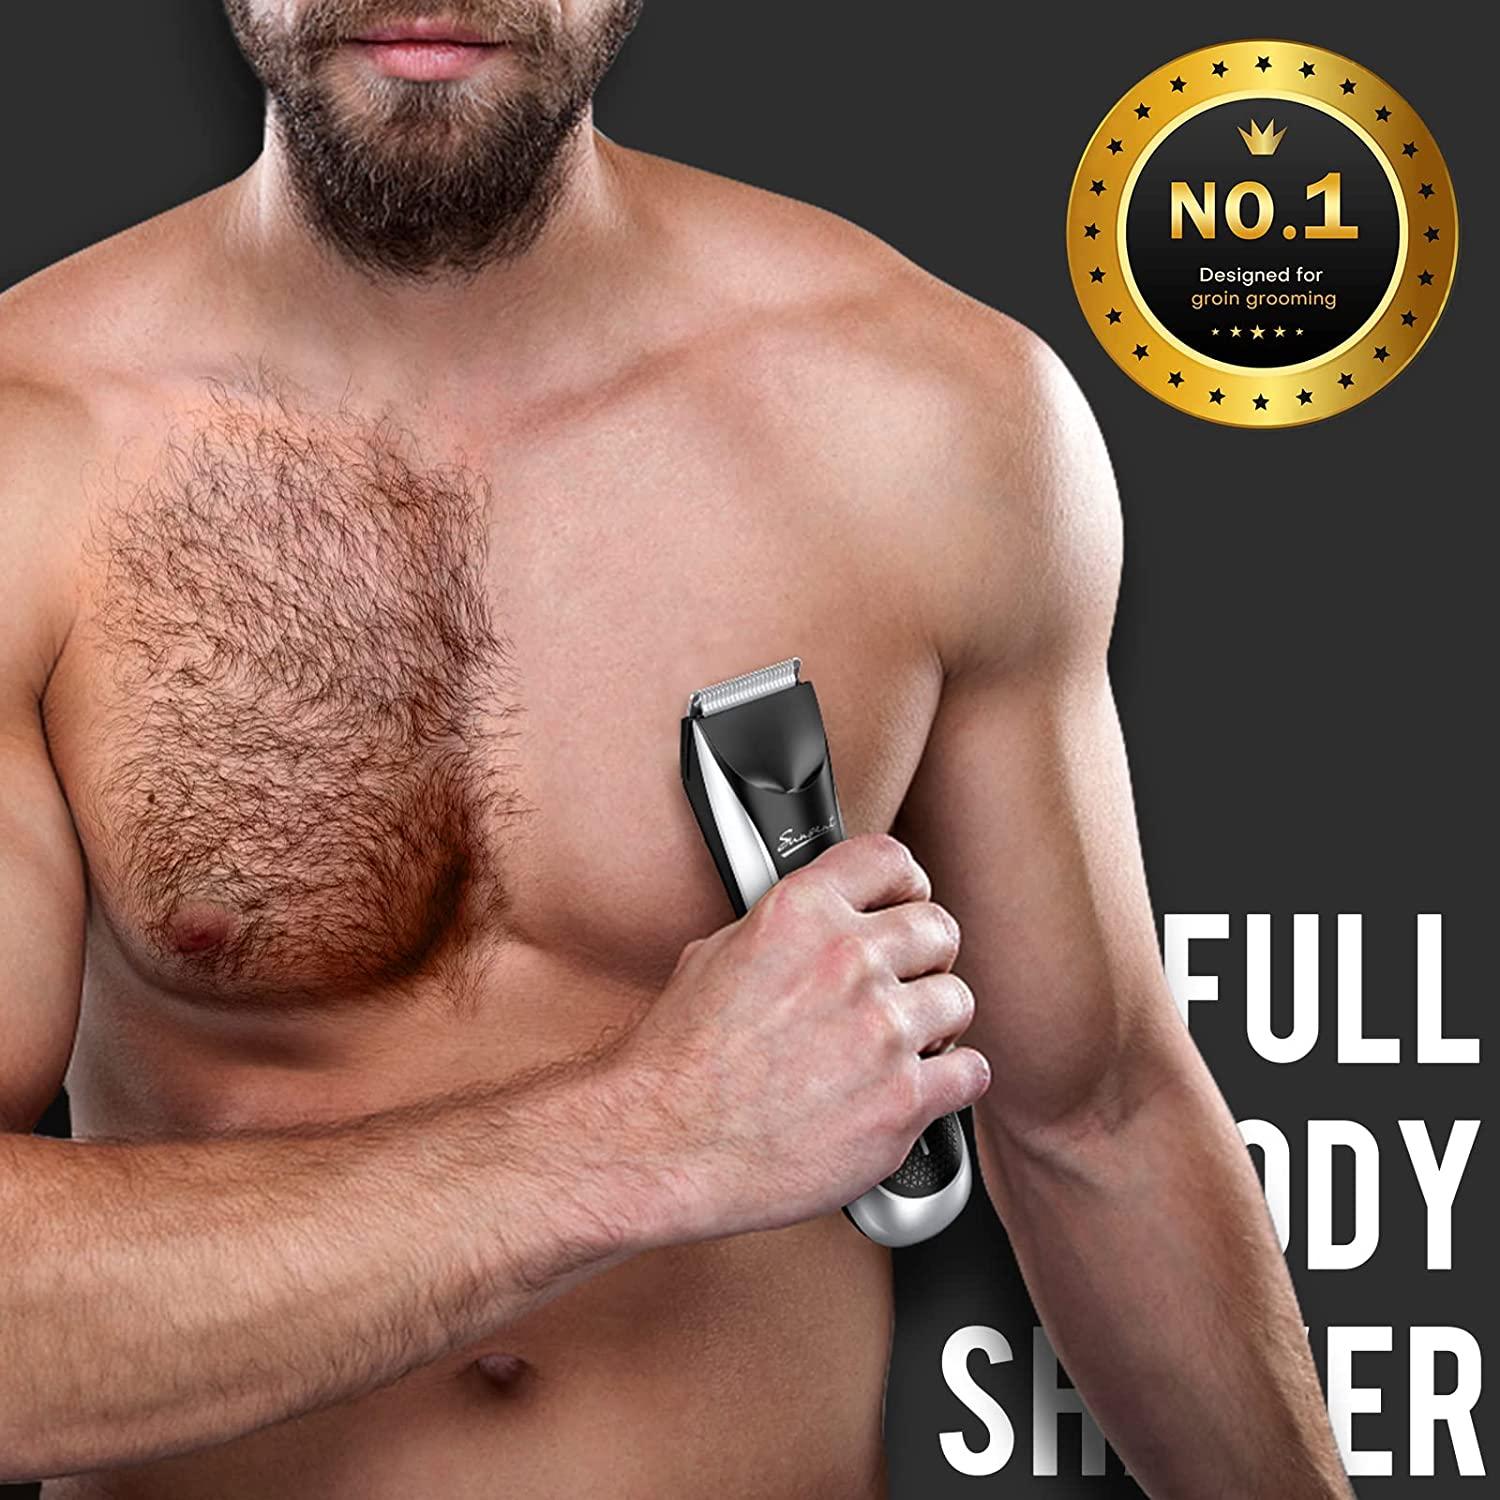 Body Hair Trimmer for Men, Electric Ball Shaver Groomer with LED Light,  SkinSafe Guard, Waterproof, Rechargeable - Wet/Dry Privates Groomer - Male  Groin Hair Trimming Hygiene Razor